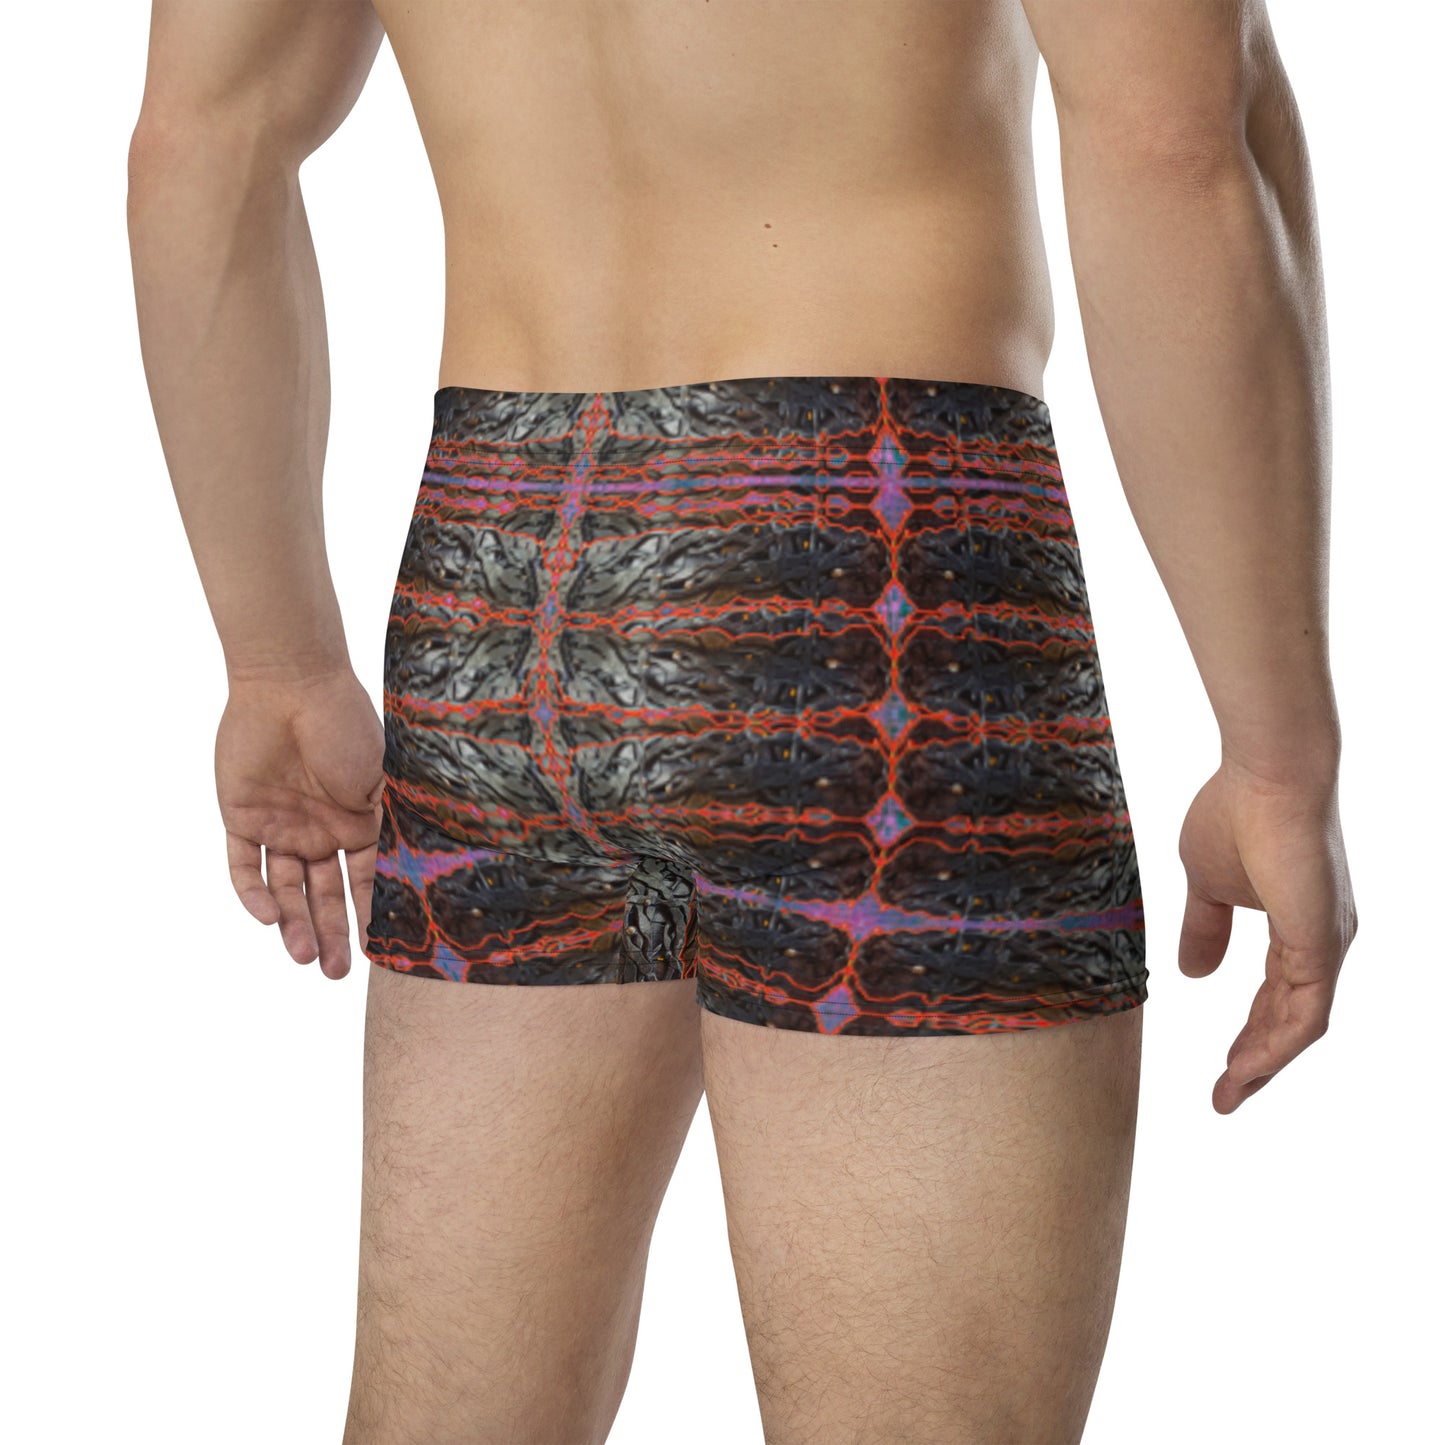 Boxer Briefs (His/They)(Rind#6 Tree Link) RJSTH@Fabric#6 RJSTHW2021 RJS